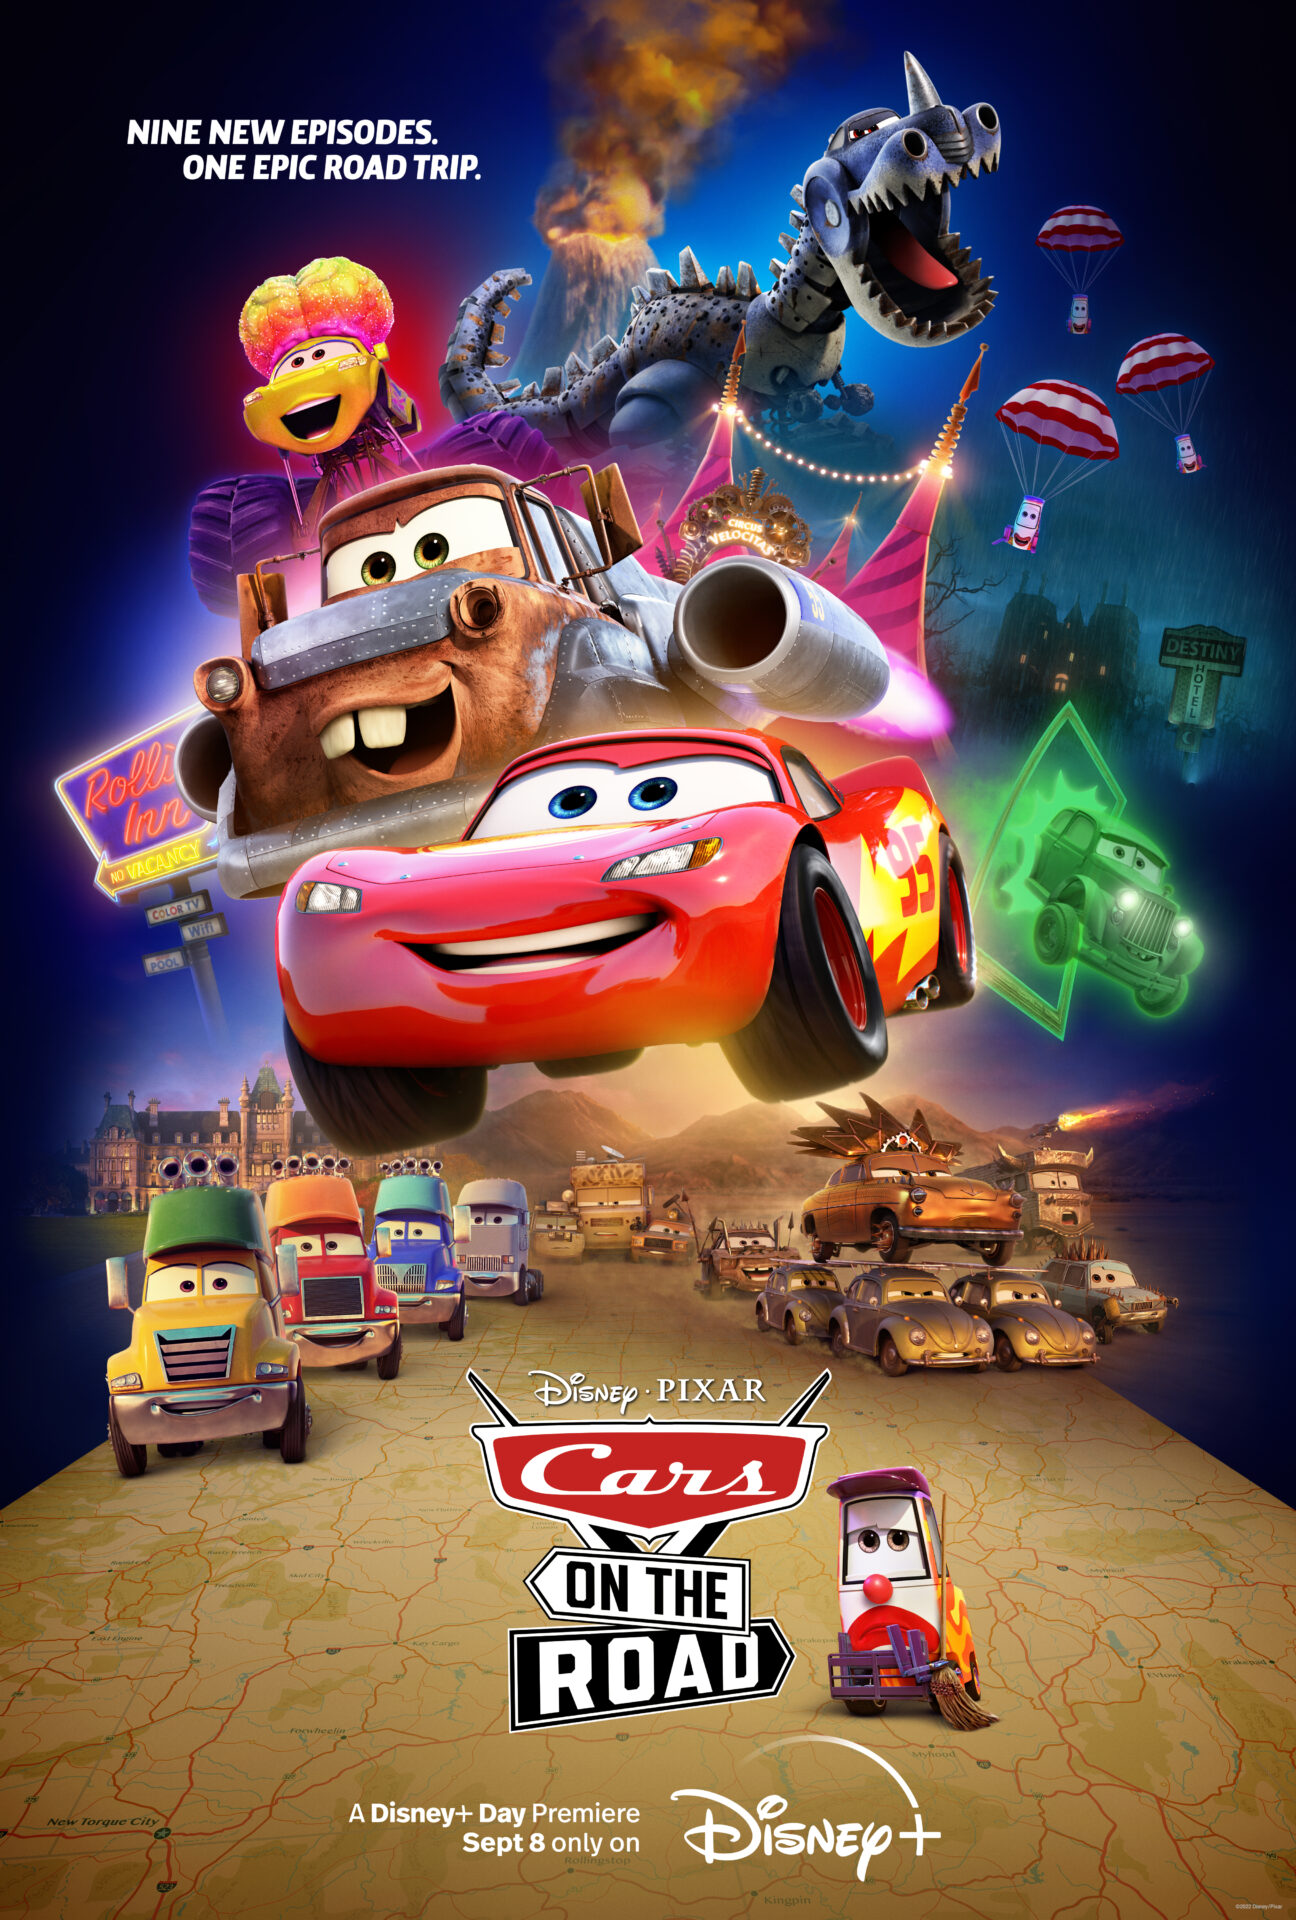 CARS ON THE ROAD Season One Overview Movieguide Movie Reviews for